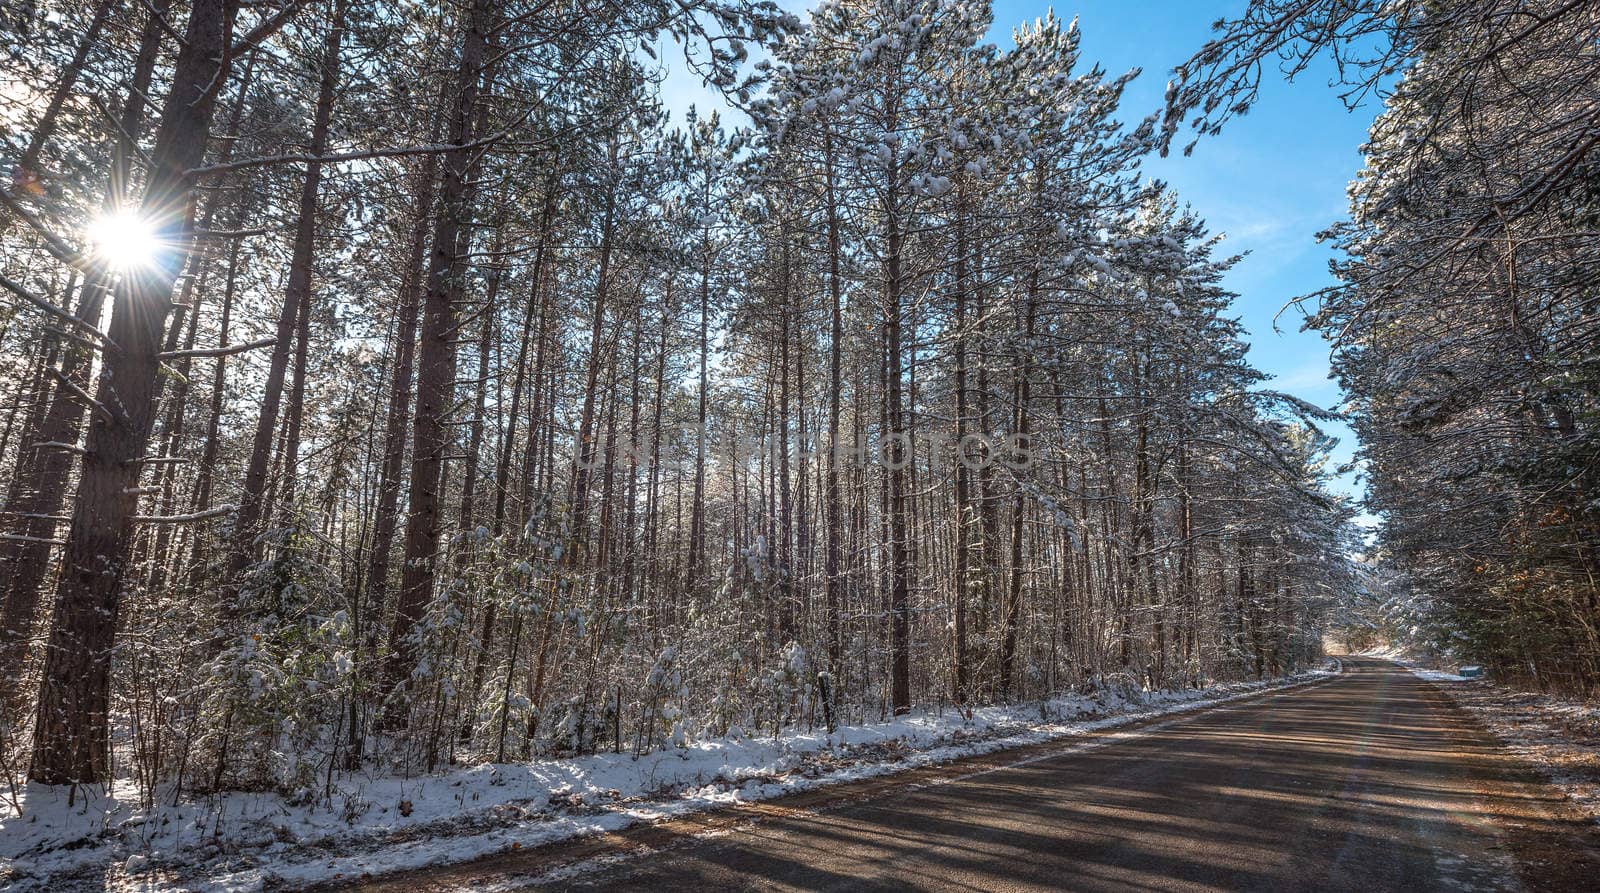 sun shines through the forest, frosty winter morning finds tall pine forests lightly covered in fresh fallen snow.